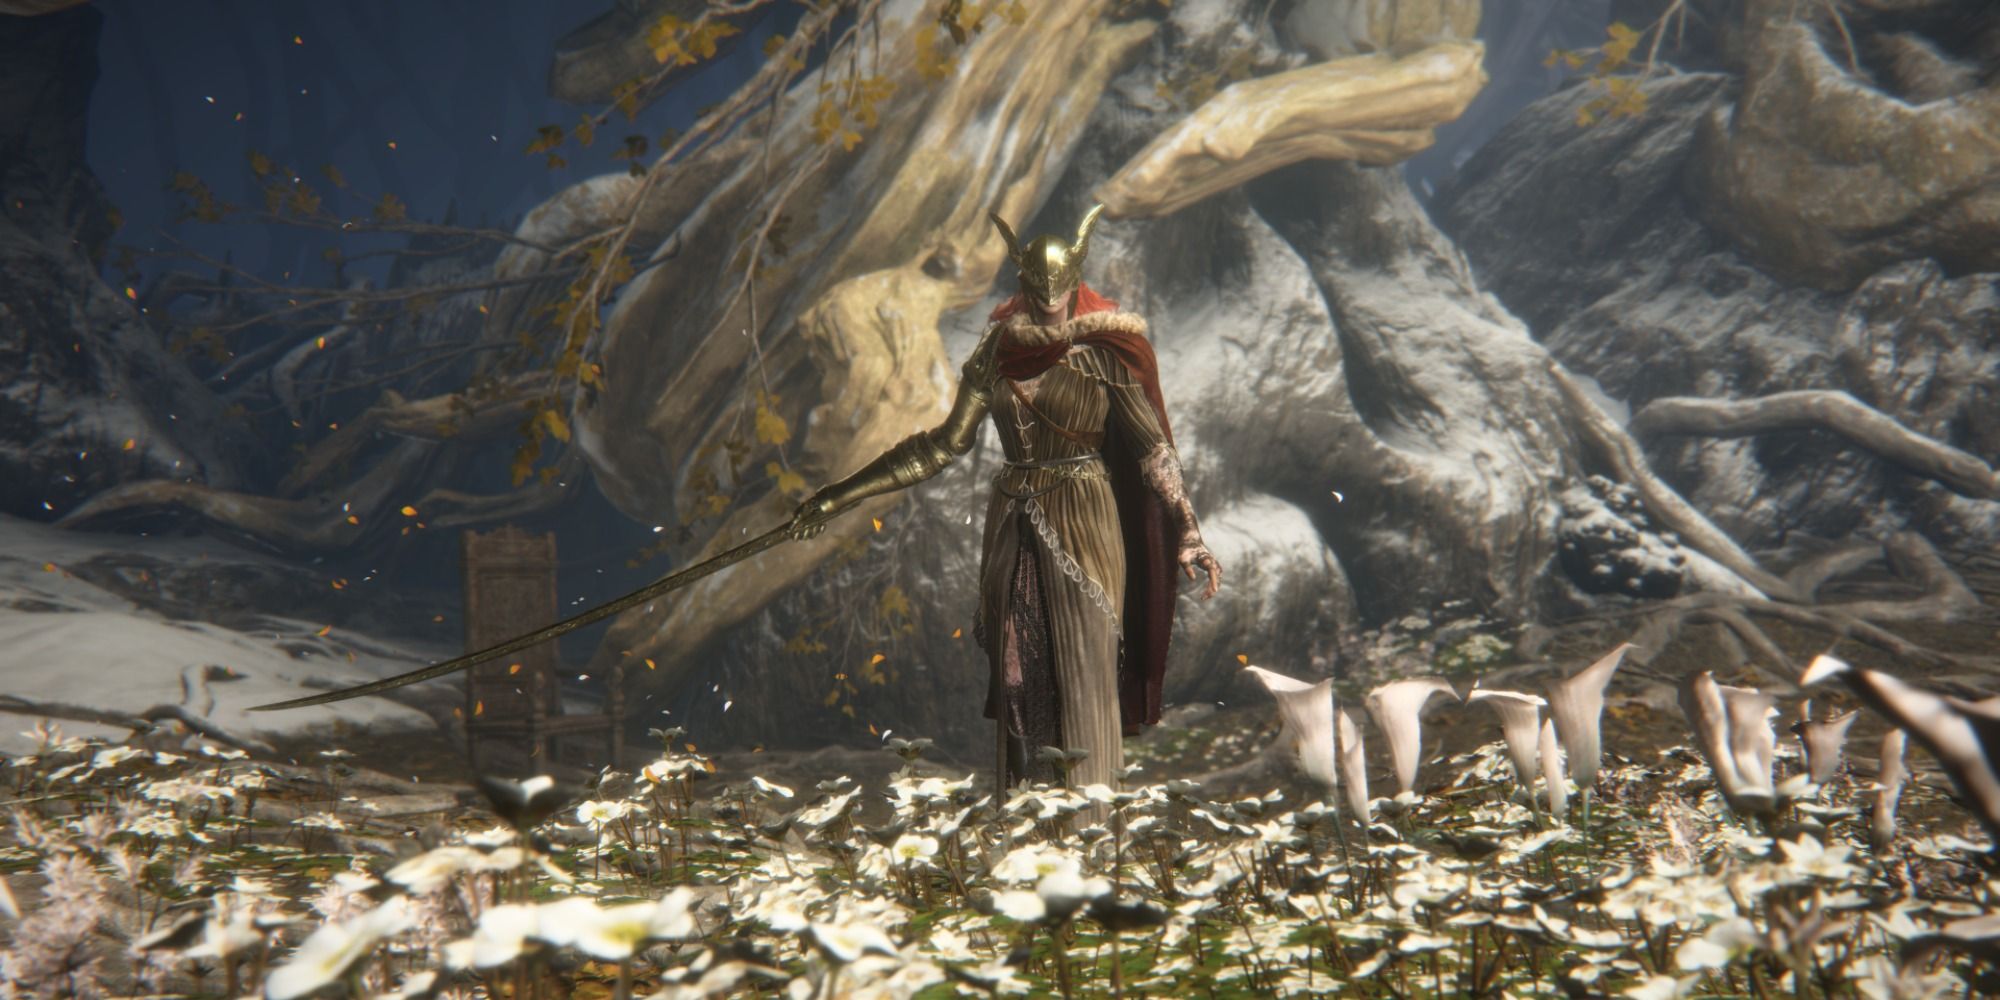 Malenia, Blade of Miquella, walking towards the player in Elden Ring